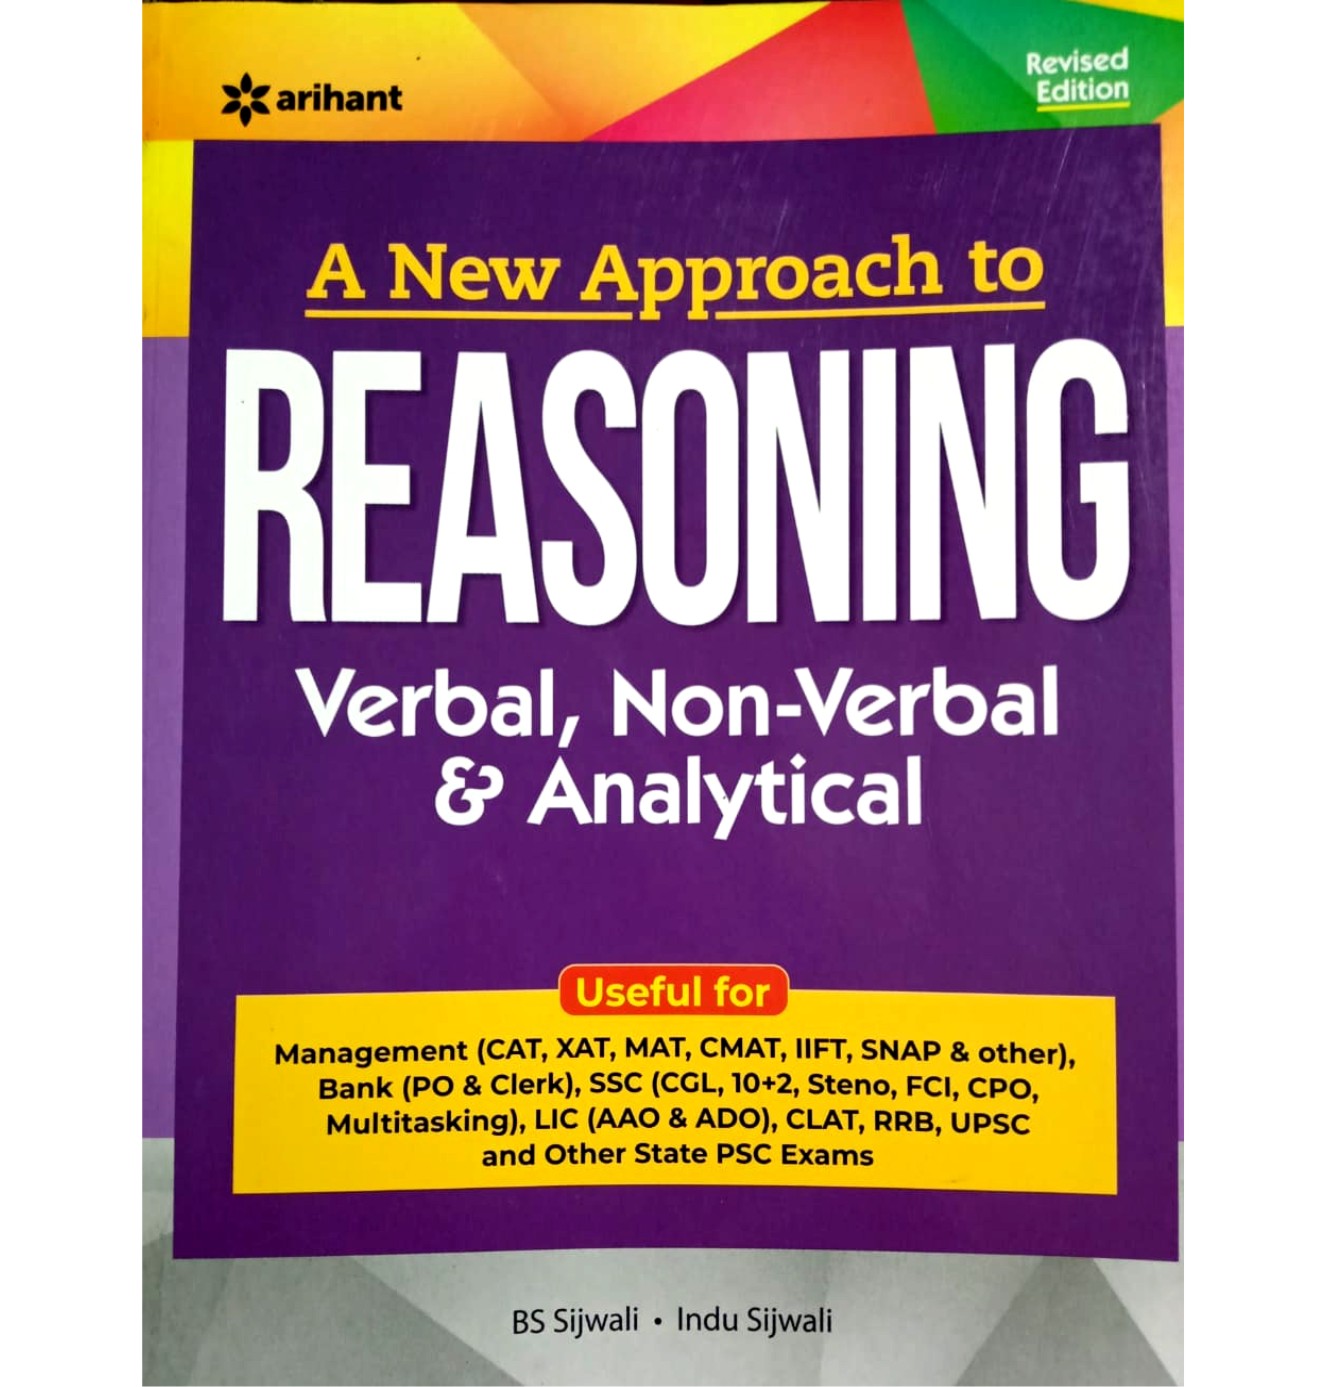 book_A-New-Approach-to-REASONING-Verbal-Non-Verbal-BY-ARIHANT-1.jpg